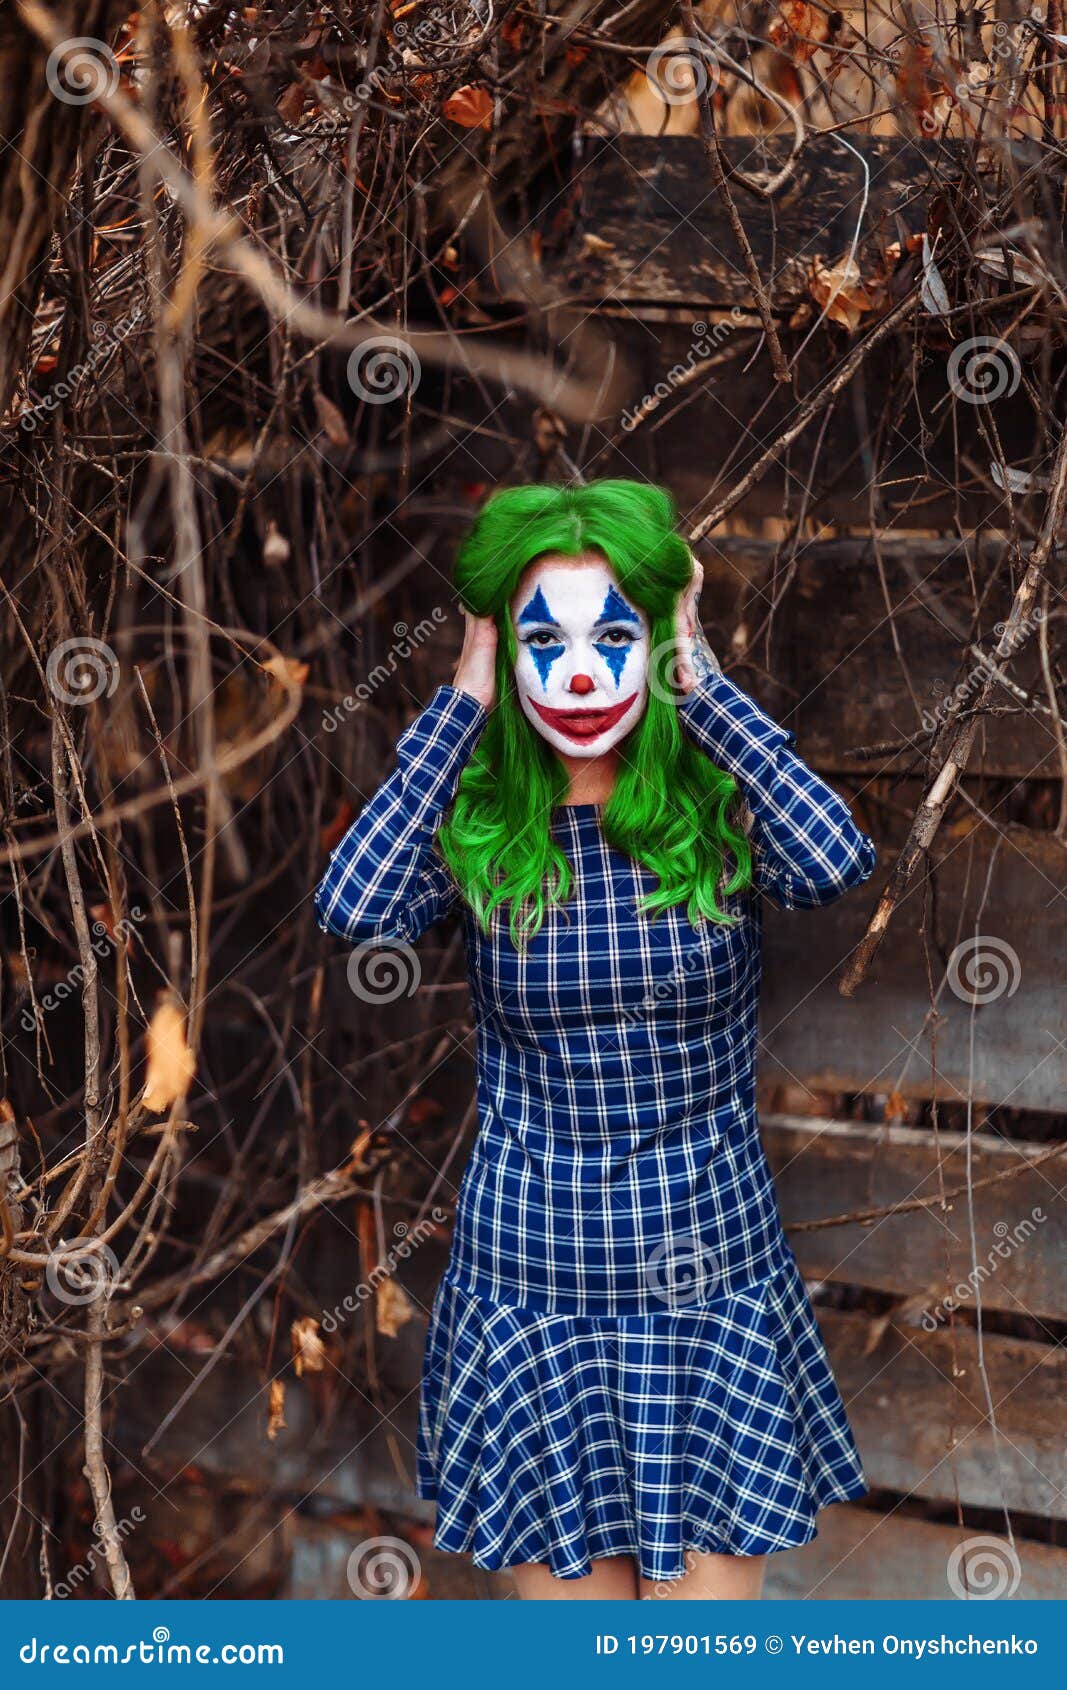 Portrait of a Greenhaired Girl in Chekered Dress with Joker Makeup ...